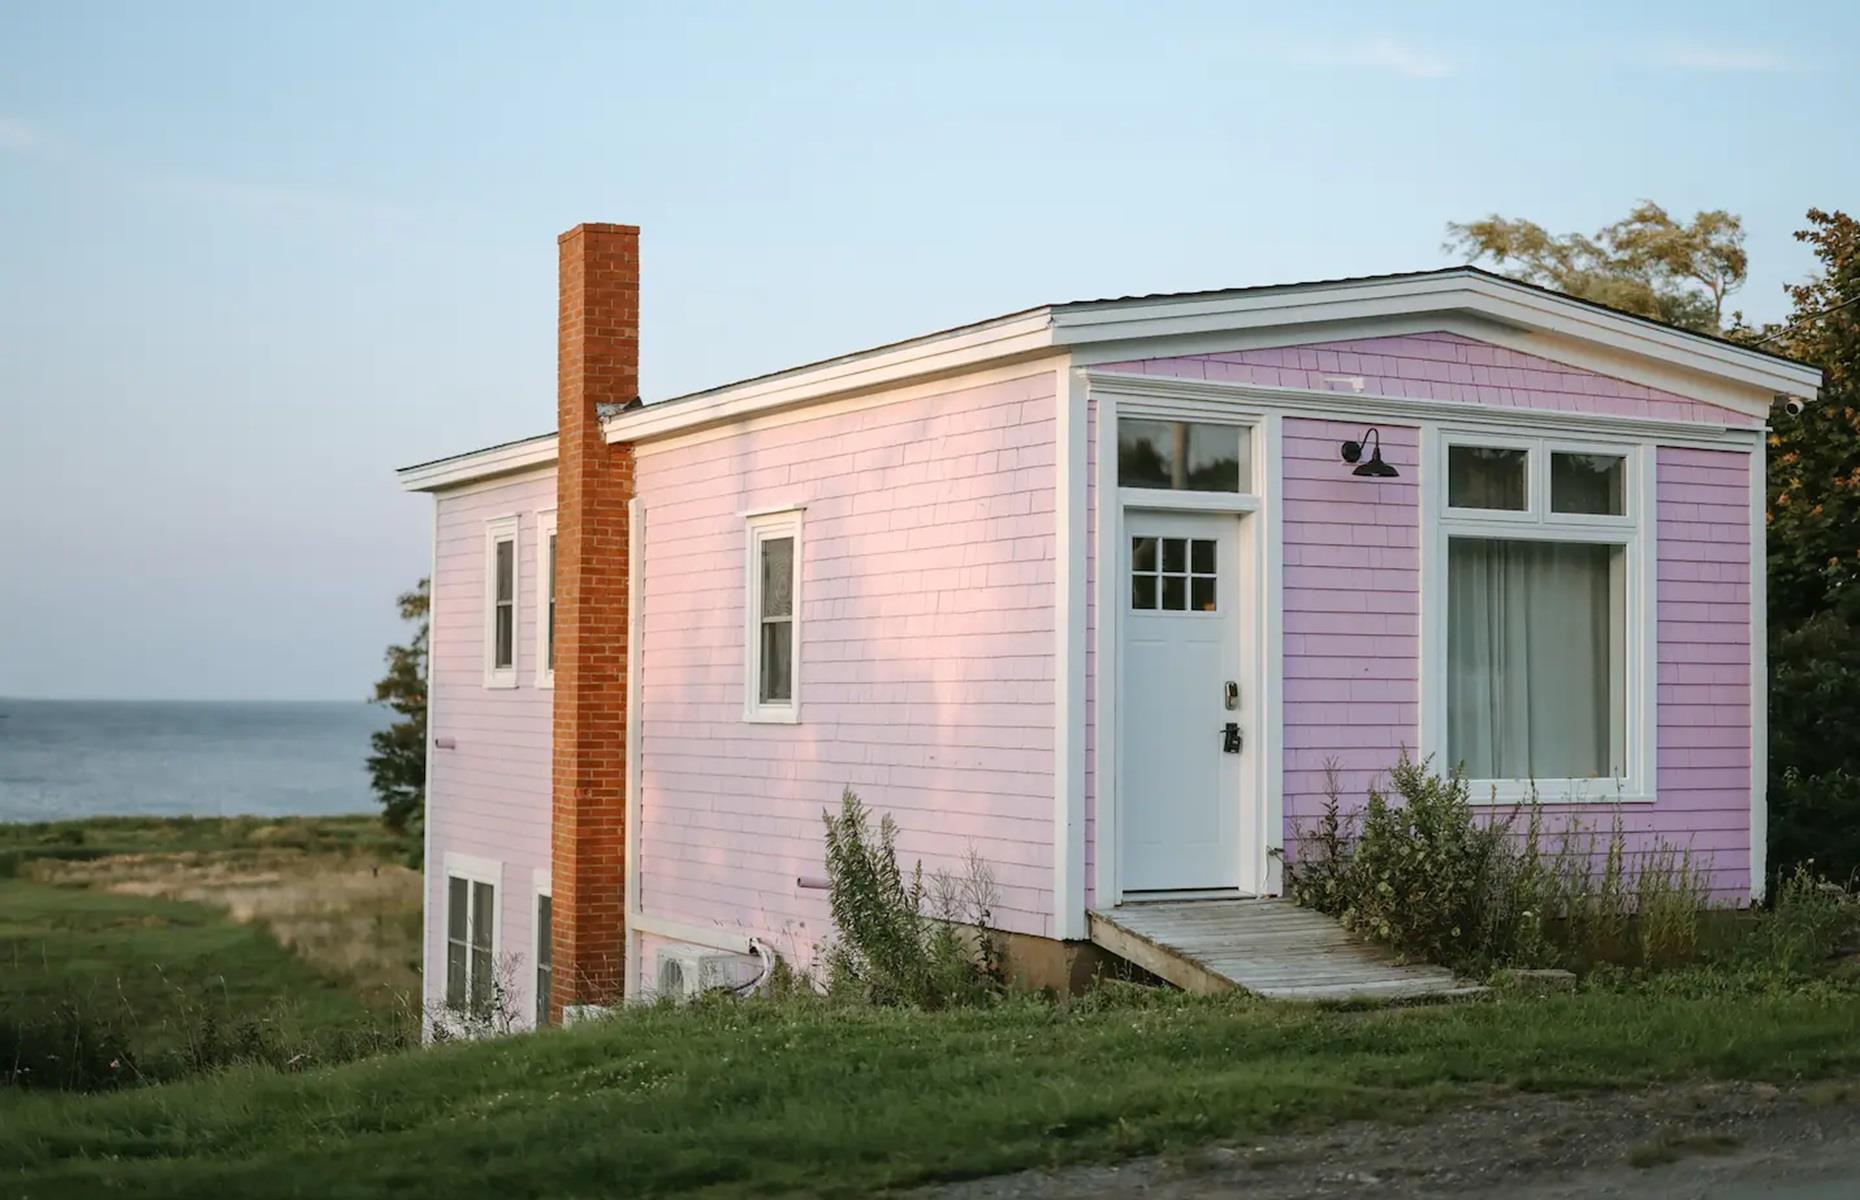 <p>Pretty in pink, this property is as adorable as it is inviting. Known as <a href="https://www.airbnb.ca/rooms/602738350100720466?adults=1&children=0&enable_m3_private_room=true&infants=0&pets=0&check_in=2024-02-04&check_out=2024-02-09&source_impression_id=p3_1706191845_qXio7JmgJWEtRvfP&previous_page_section_name=1000&federated_search_id=00a55313-1bbe-441a-a50e-ac4f5e0e5556">South Shore Cottage</a>, it might not look like much from the outside, but it's located in one of Canada's most enchanting places: Rose Bay, Nova Scotia. Moments from the beach, the teeny cottage is secluded but handily just 20 minutes from Lunenburg – one of Canada's prettiest locales. Let's head inside...</p>